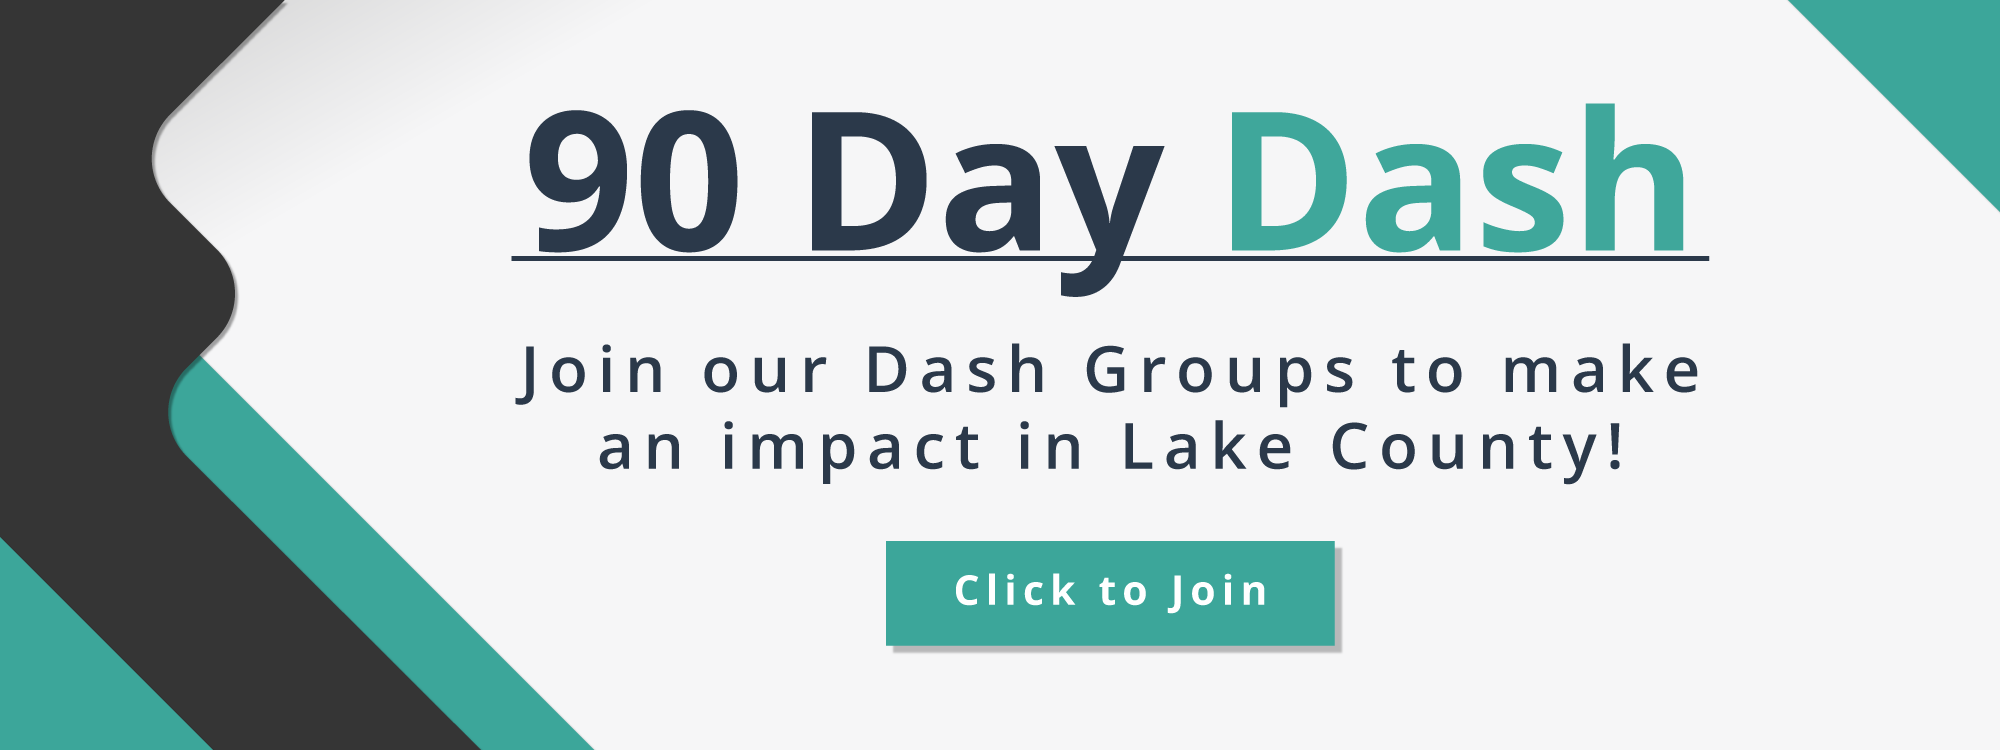 90 Day Dash Learn More